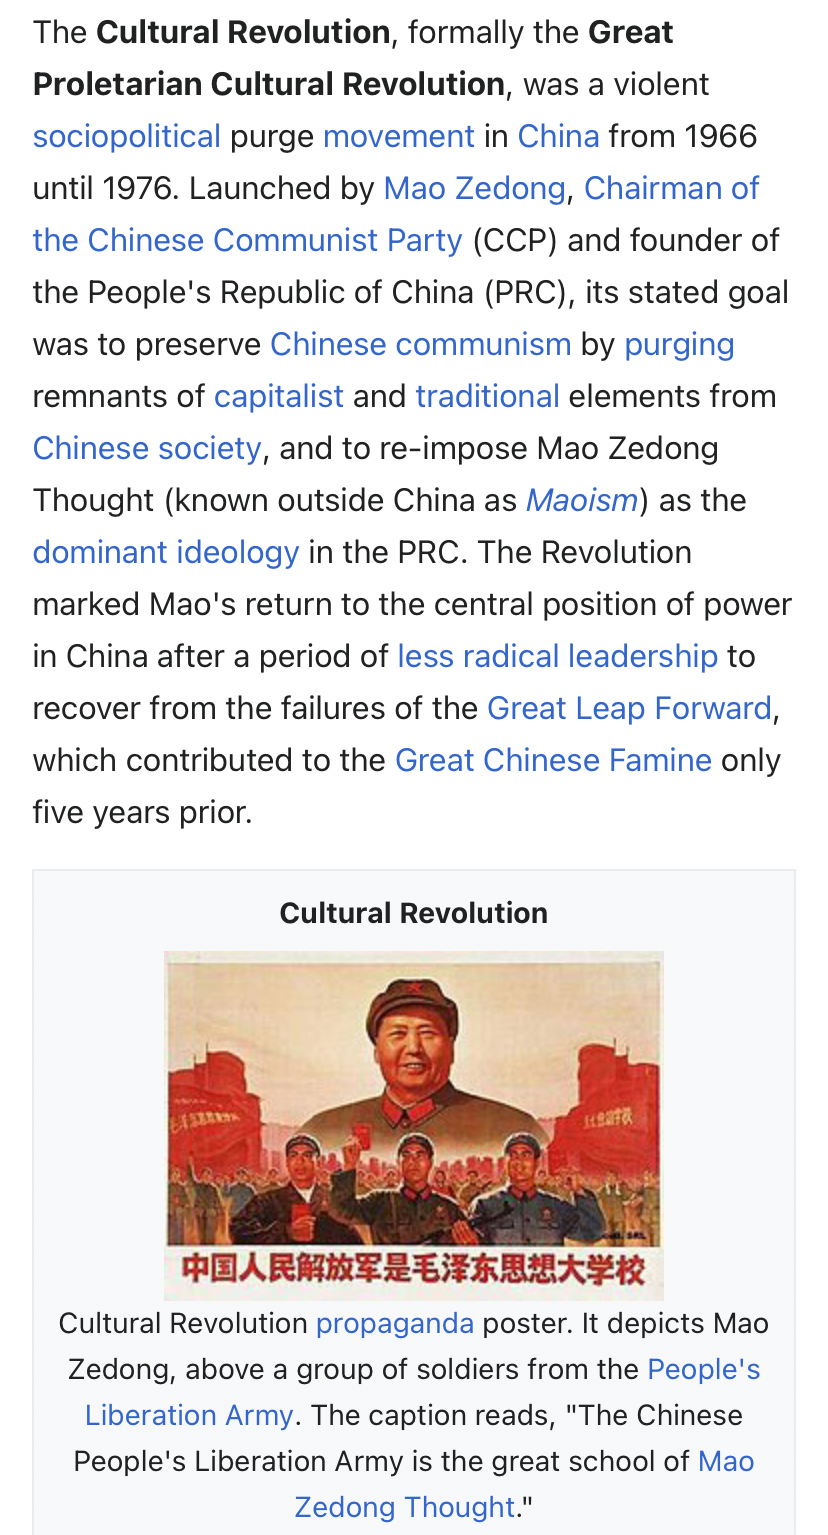 High Quality China Cultural Revolution Blank Meme Template